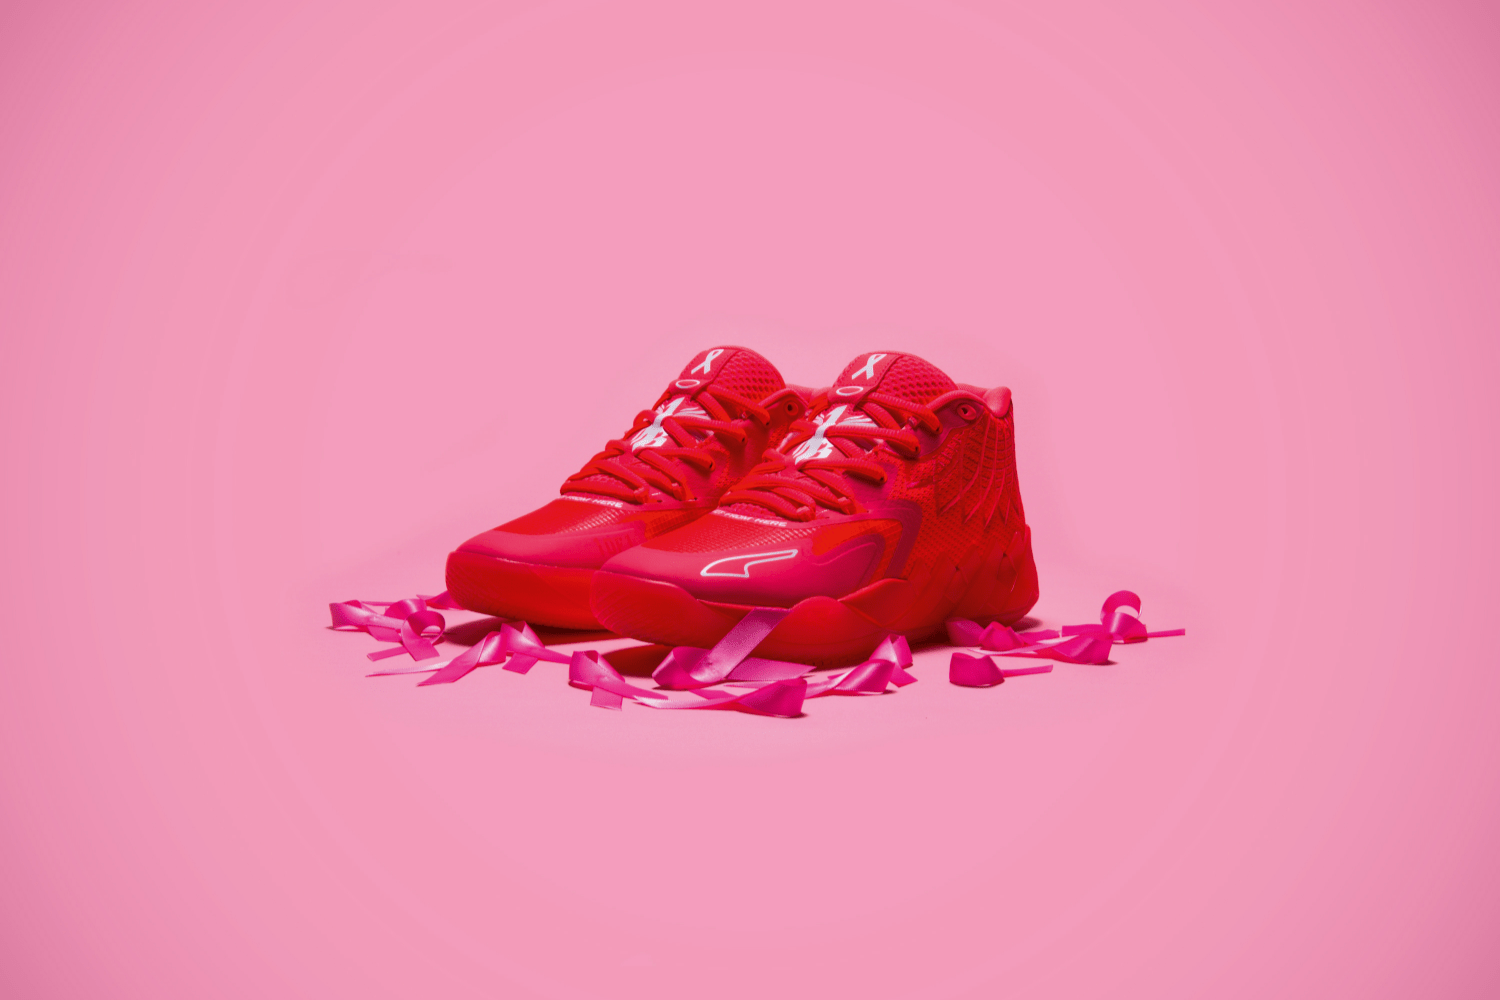 PUMA honours Breast Cancer Awareness Month with a new MB.01 colorway